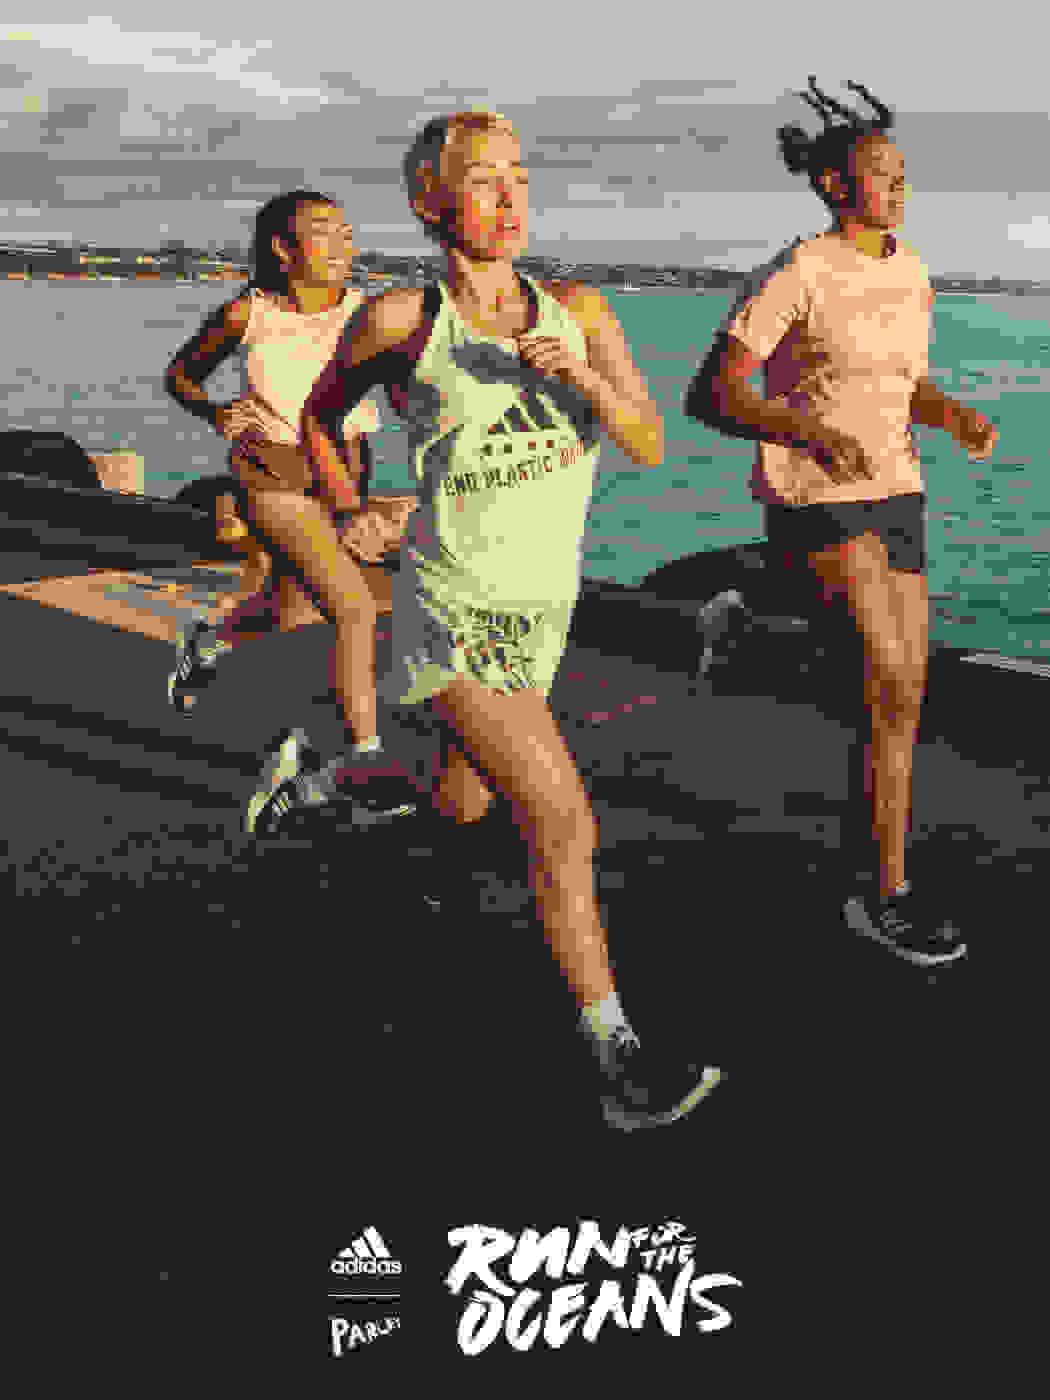 Group of women running by the ocean